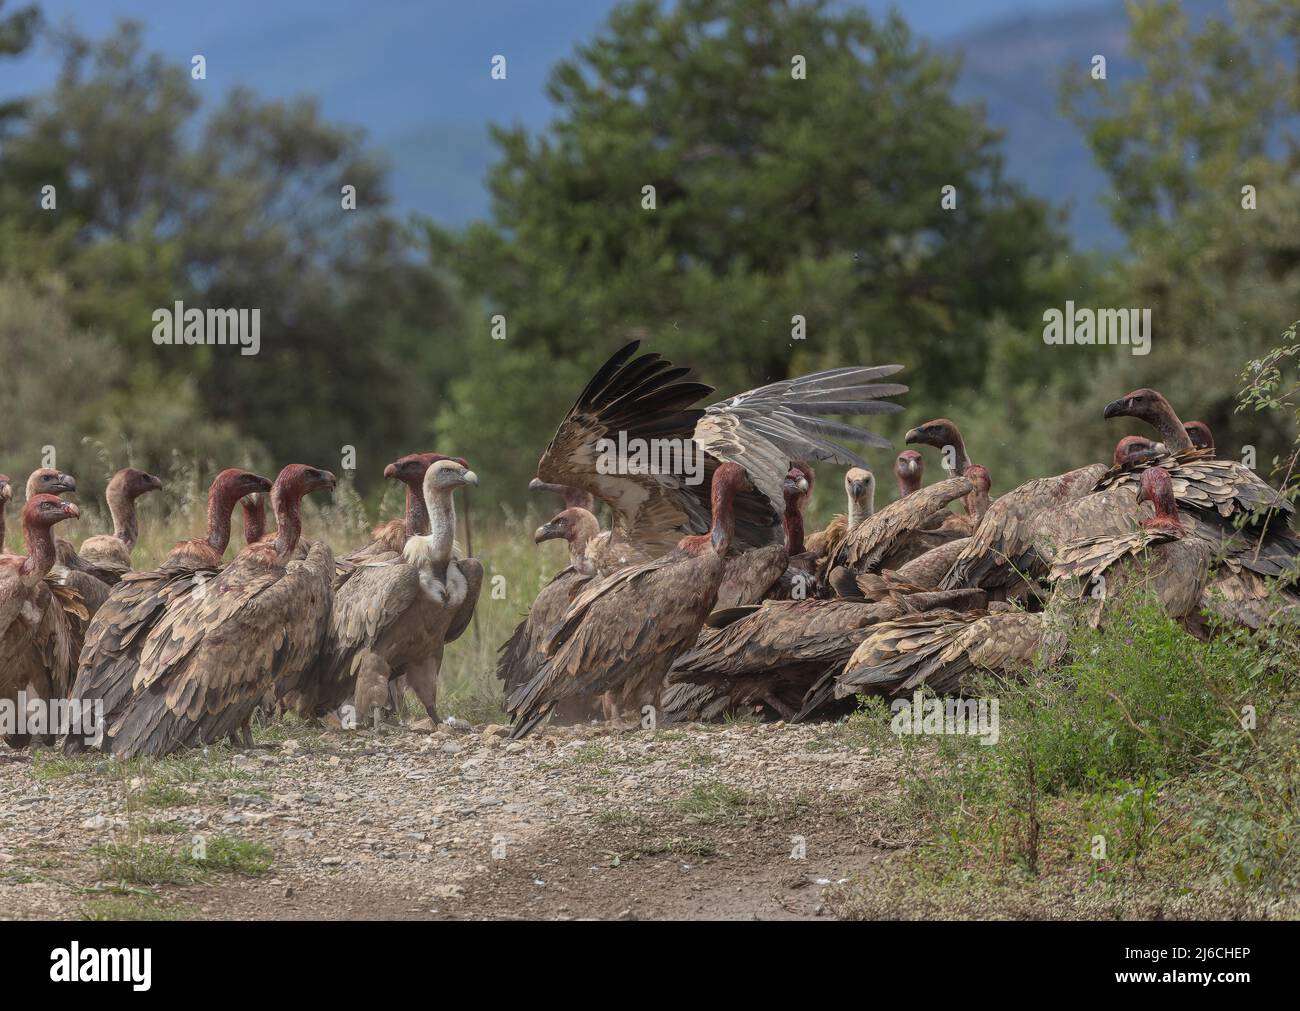 Large jostling group of Griffon vultures, Gyps fulvus, at a carcass, in the Pyrenees. Stock Photo